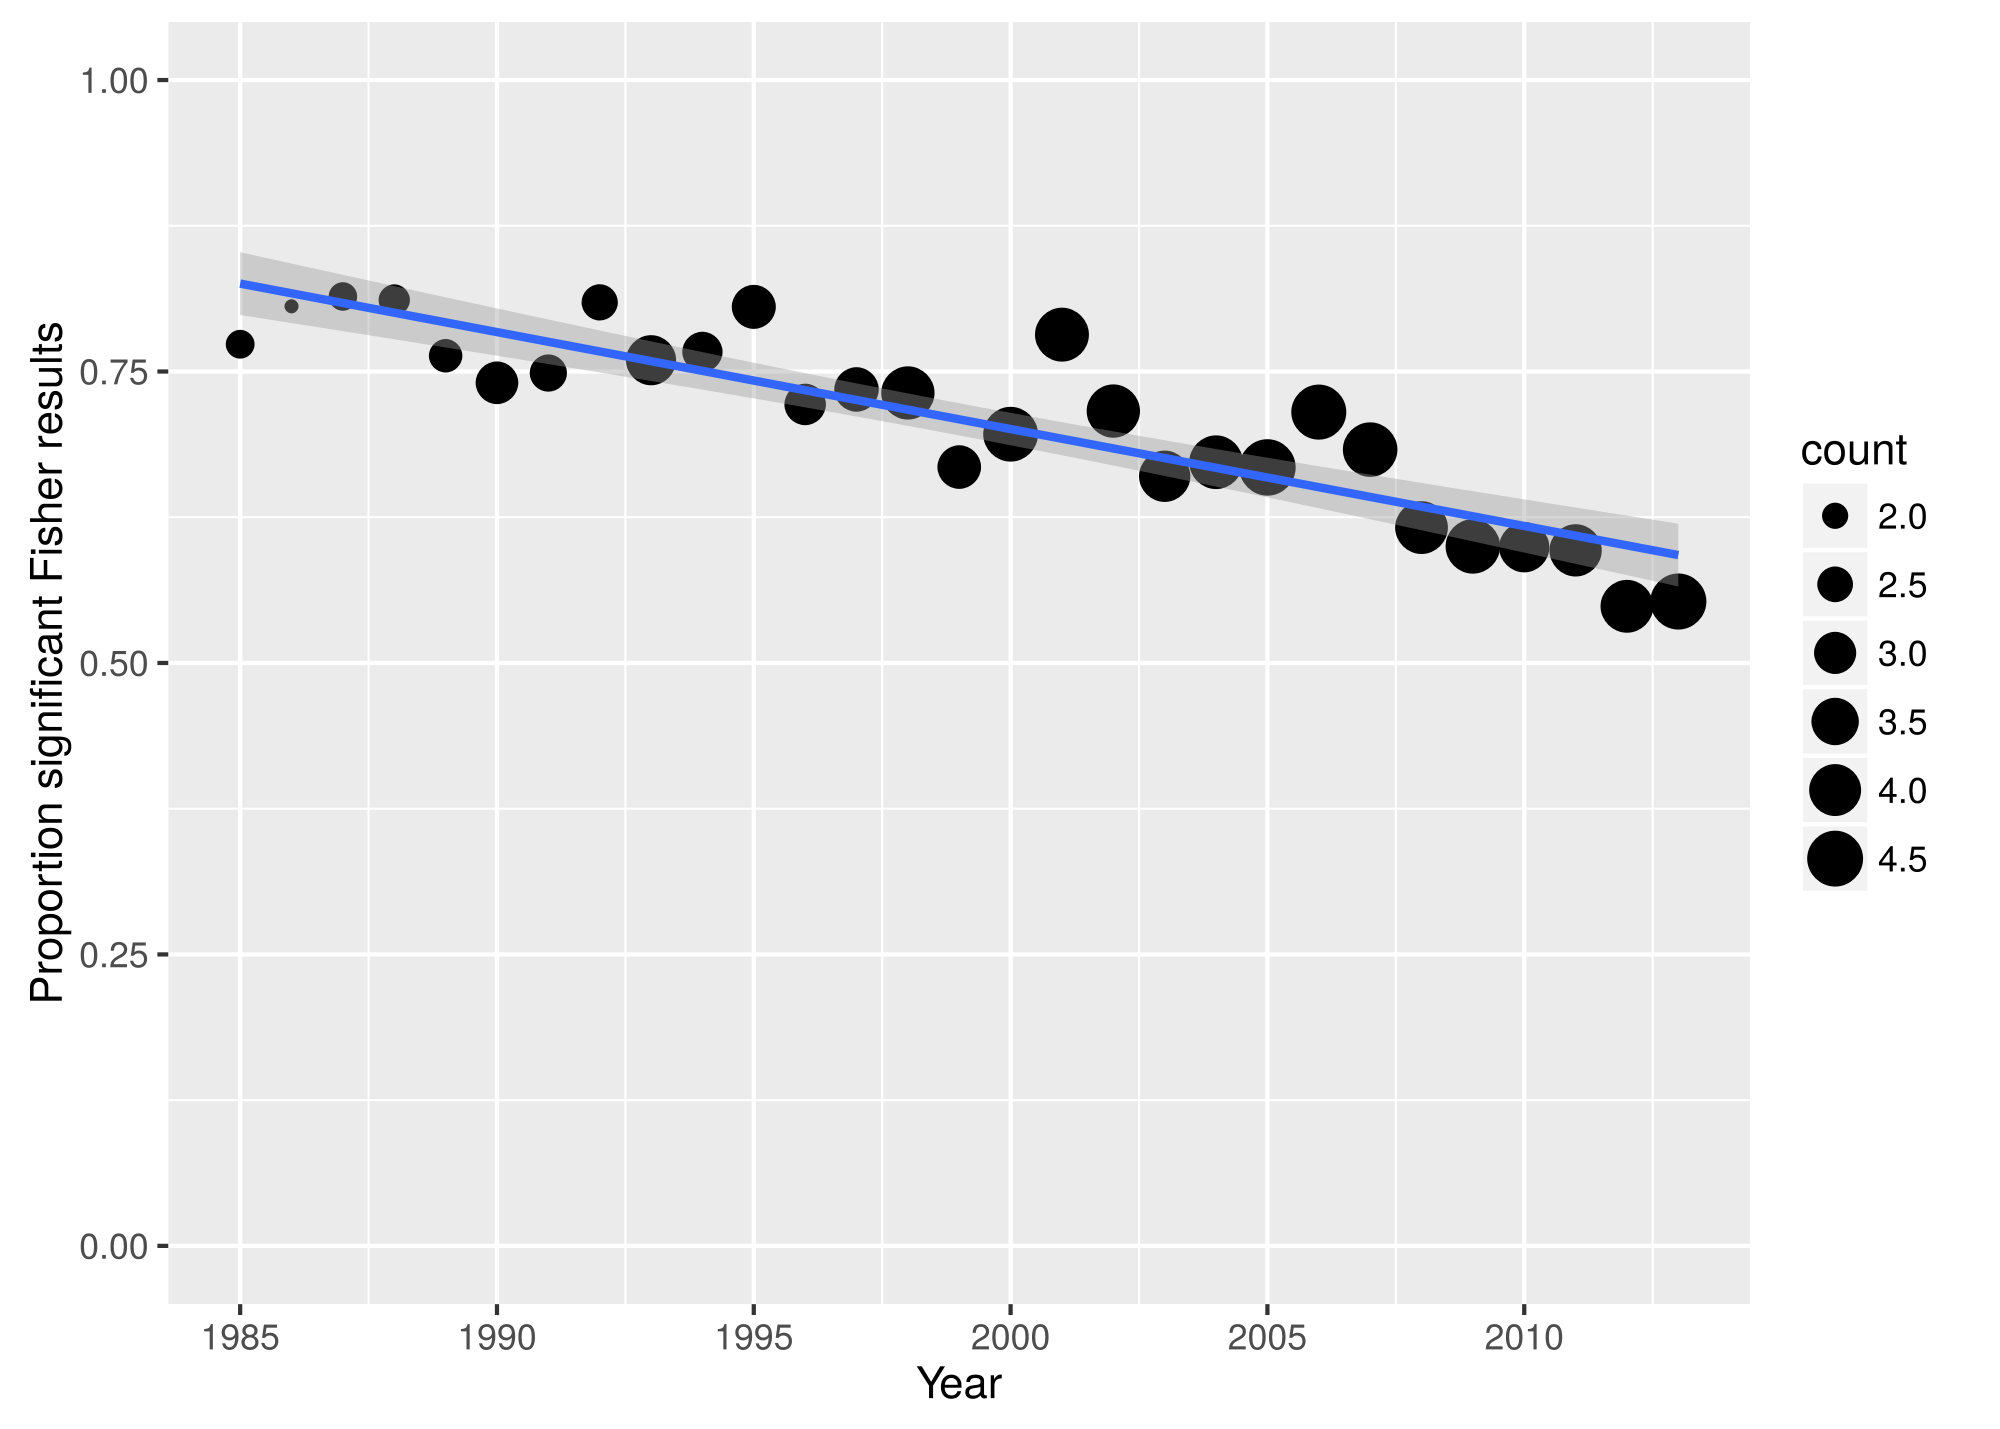 Proportion of papers reporting nonsignificant results in a given year, showing evidence for false negative results. Larger point size indicates a higher mean number of nonsignificant results reported in that year.